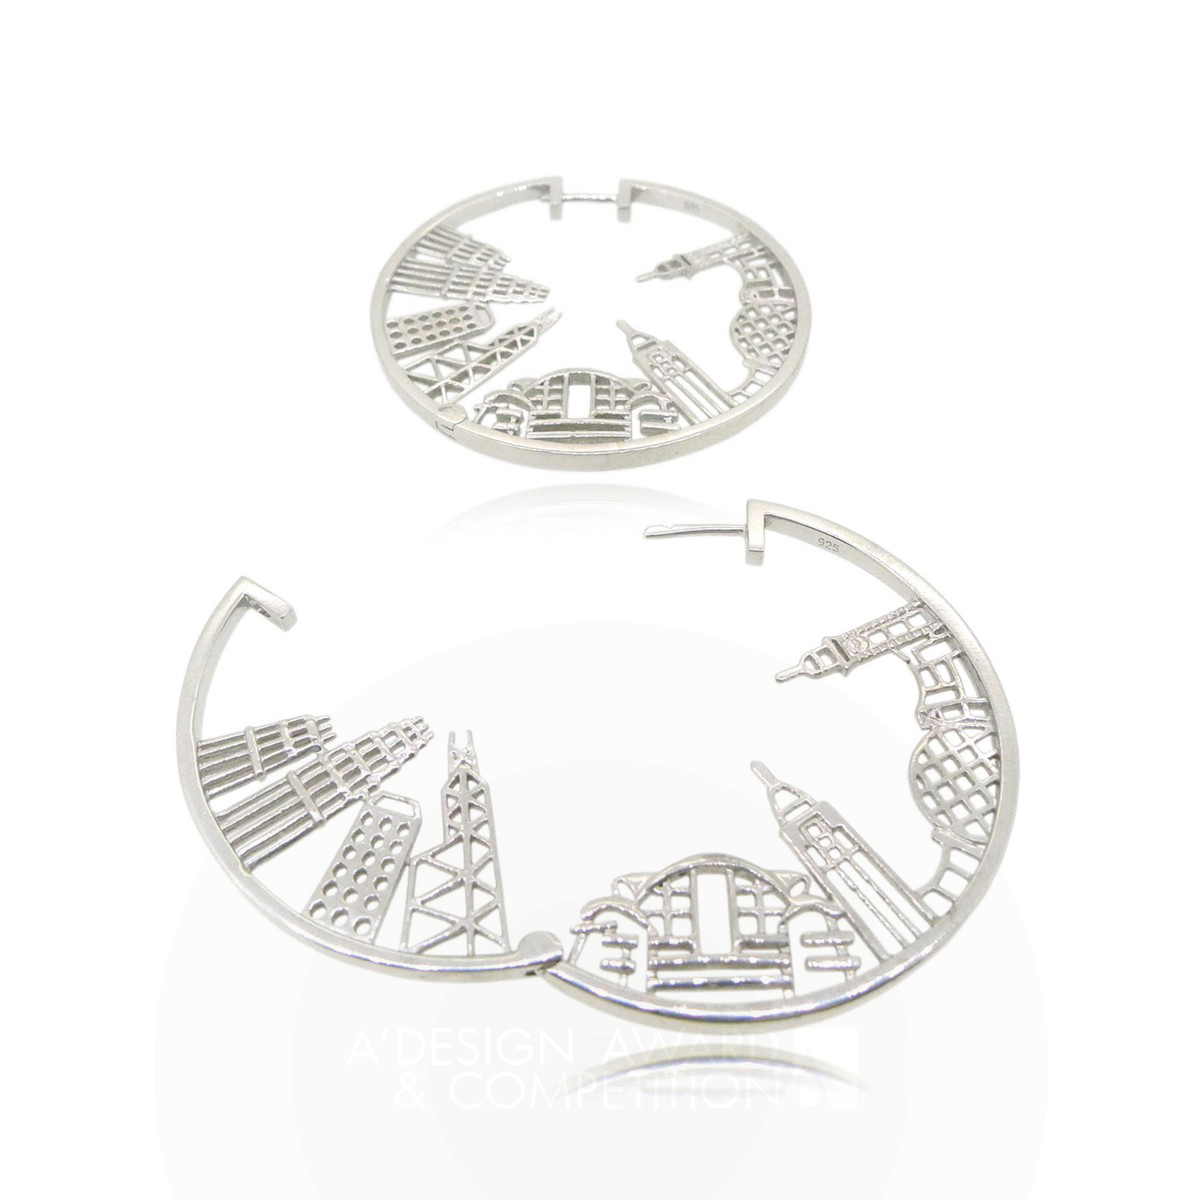 Hong Kong Skyline Jewelry Collection by HONG KONG OAPES